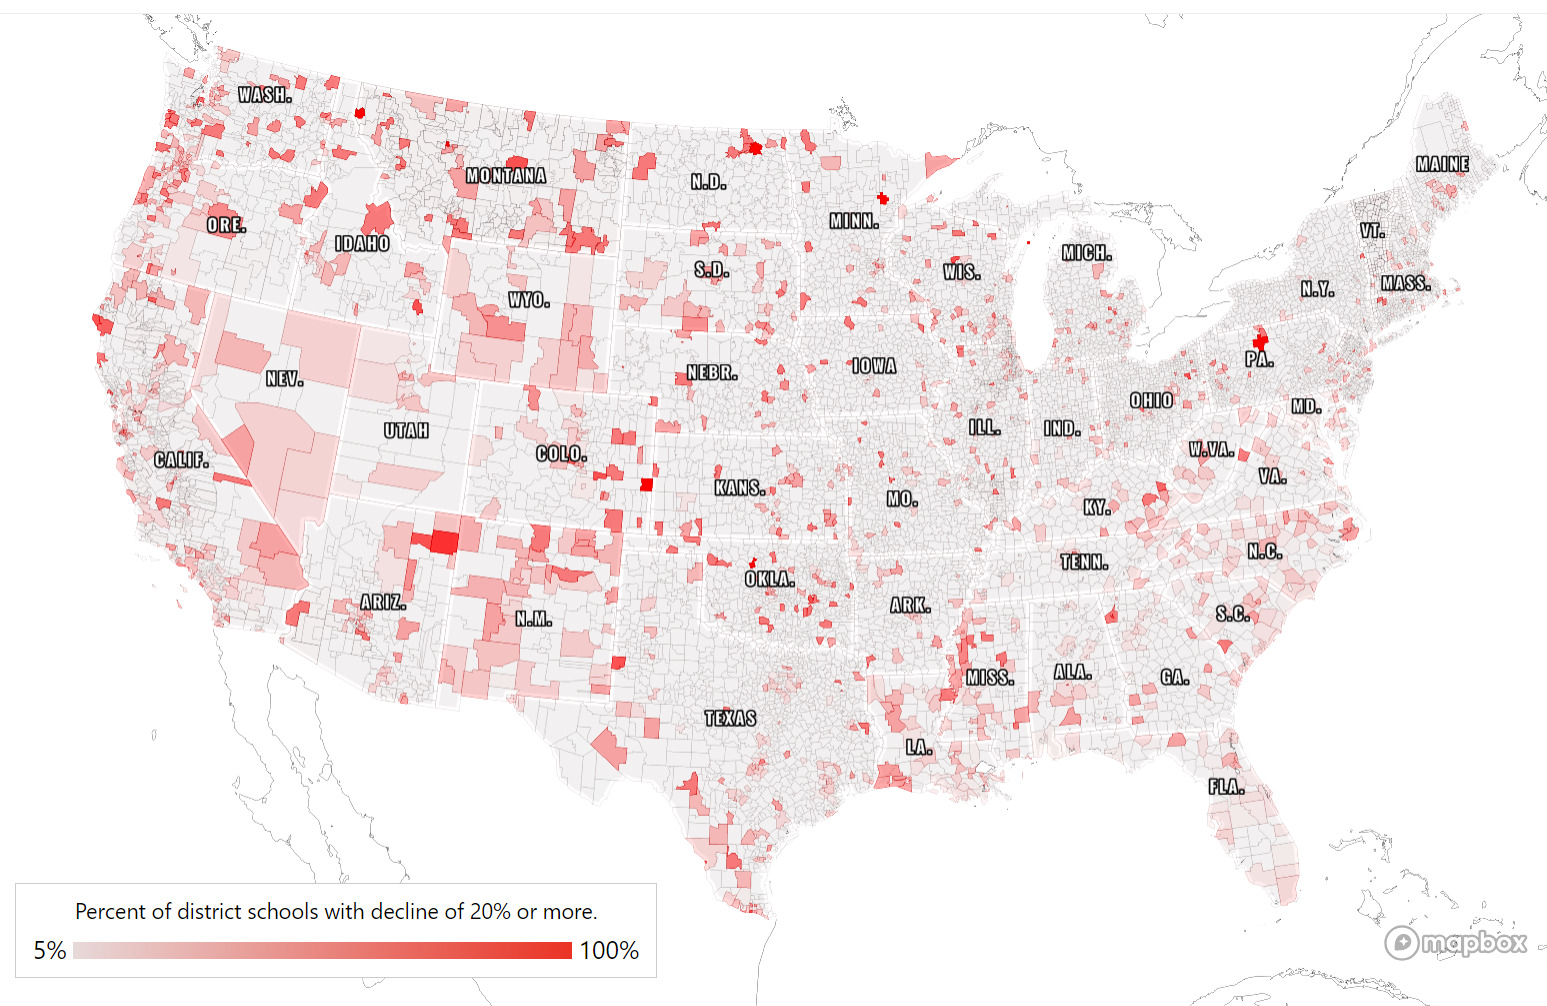 k-12 enrollment decline: Map of US with state names and pink to red shading representing the amount of decline in k-12 enrollment by geographic areas